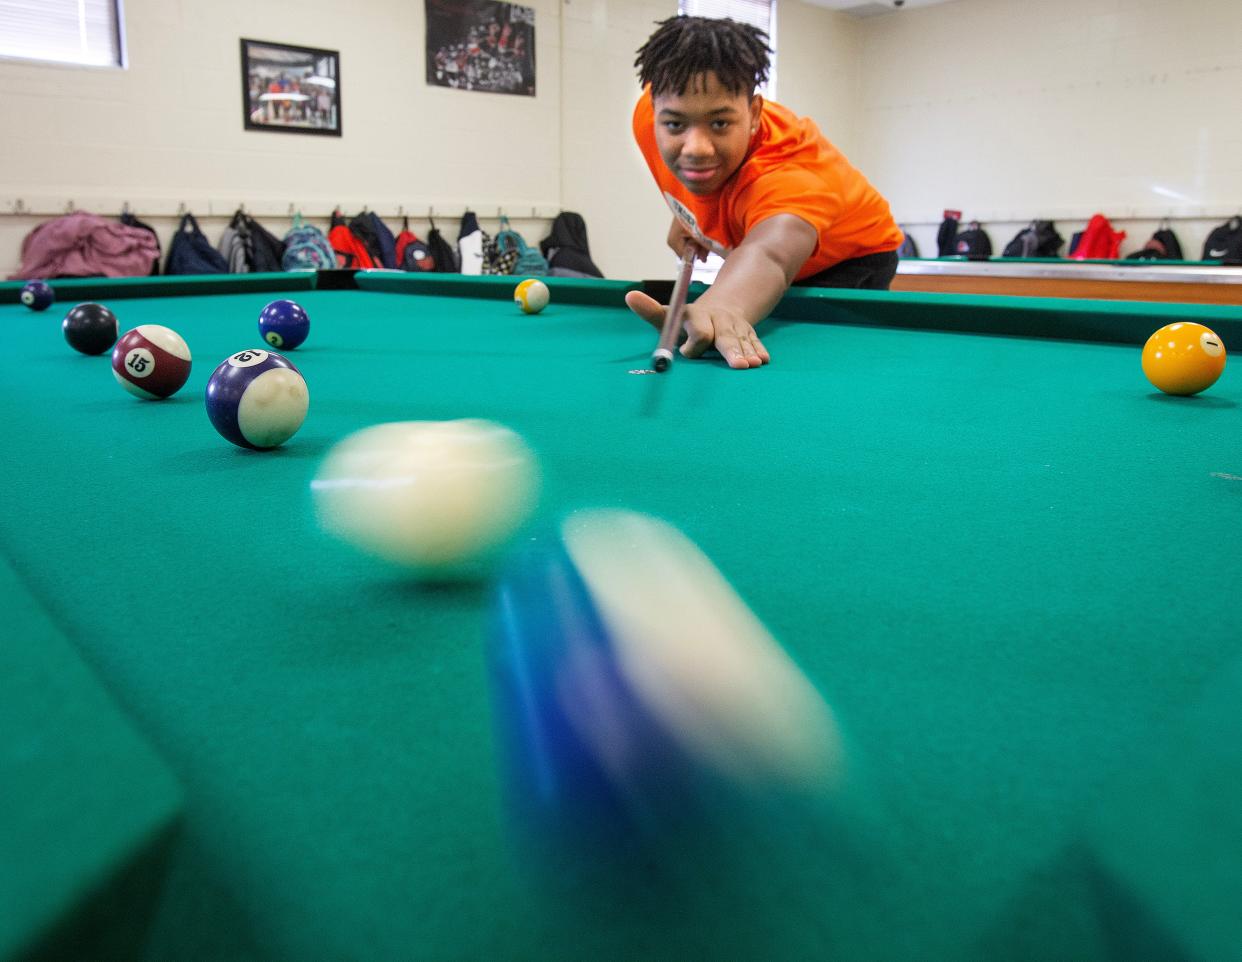 Kevon Sankey, 14, shoots pool after school at the Massillon Boys and Girls Club.